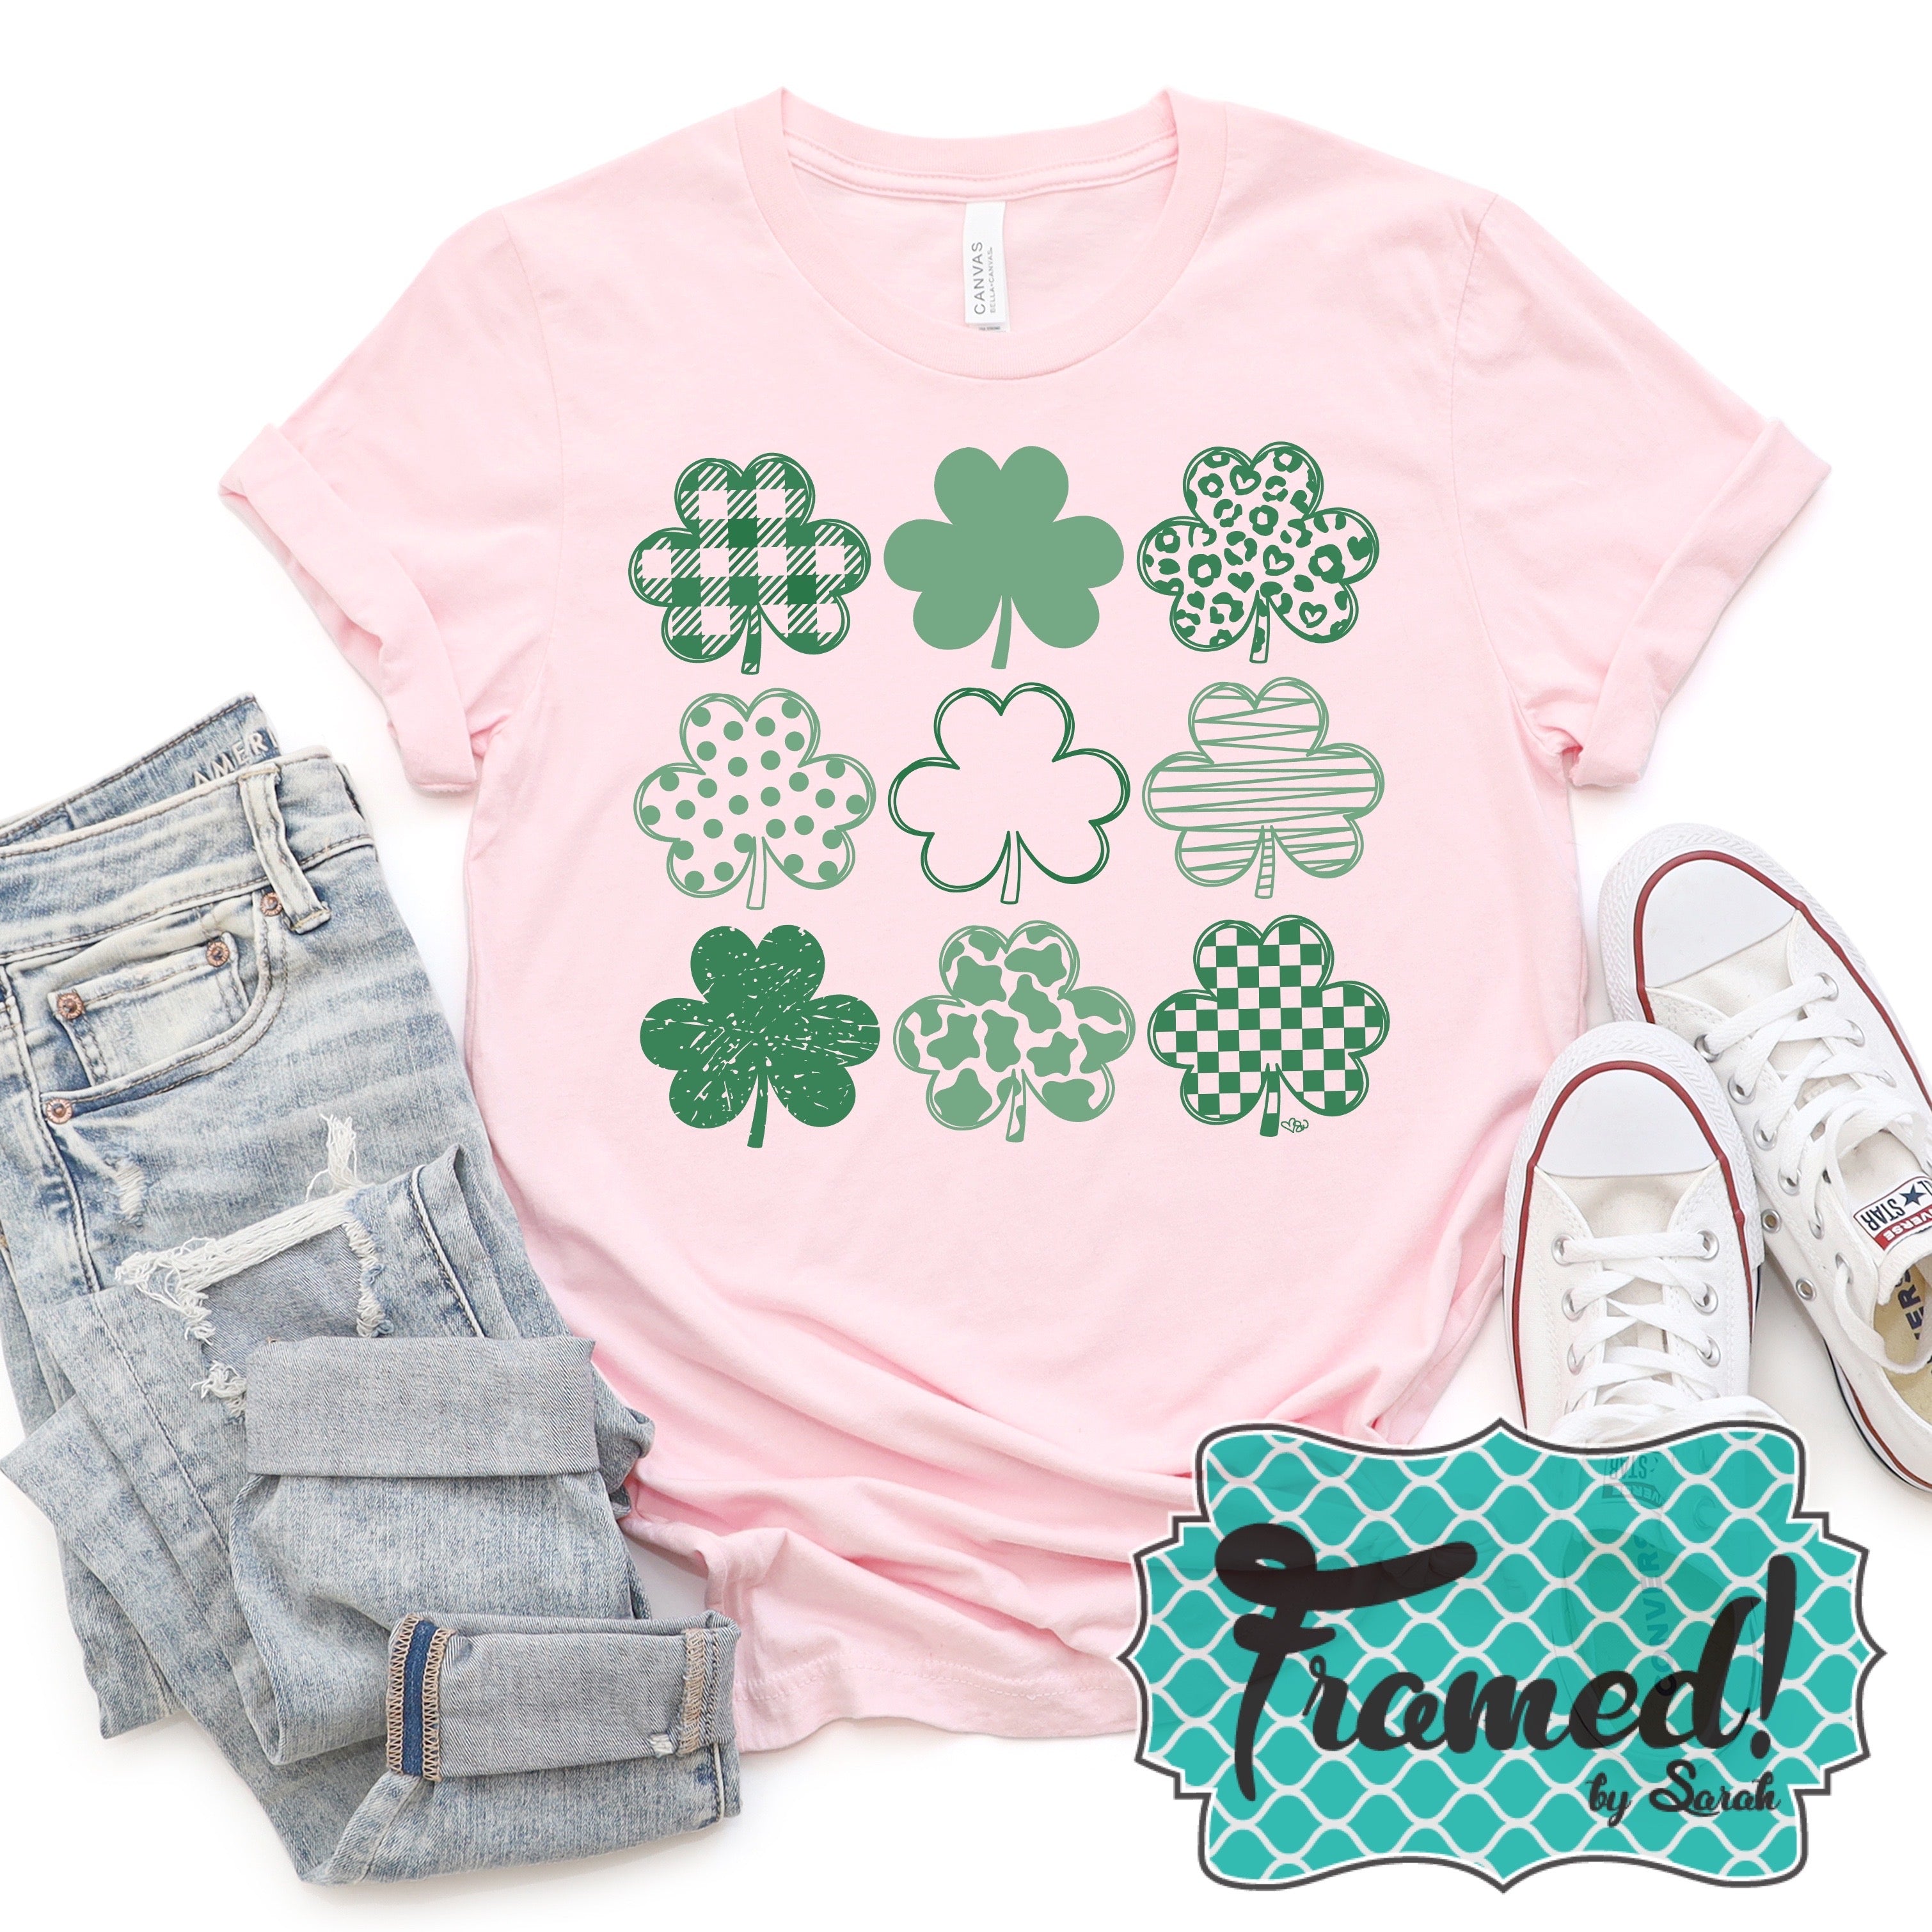 Pink 'Lots of Luck' Tee (Med & Lg only)